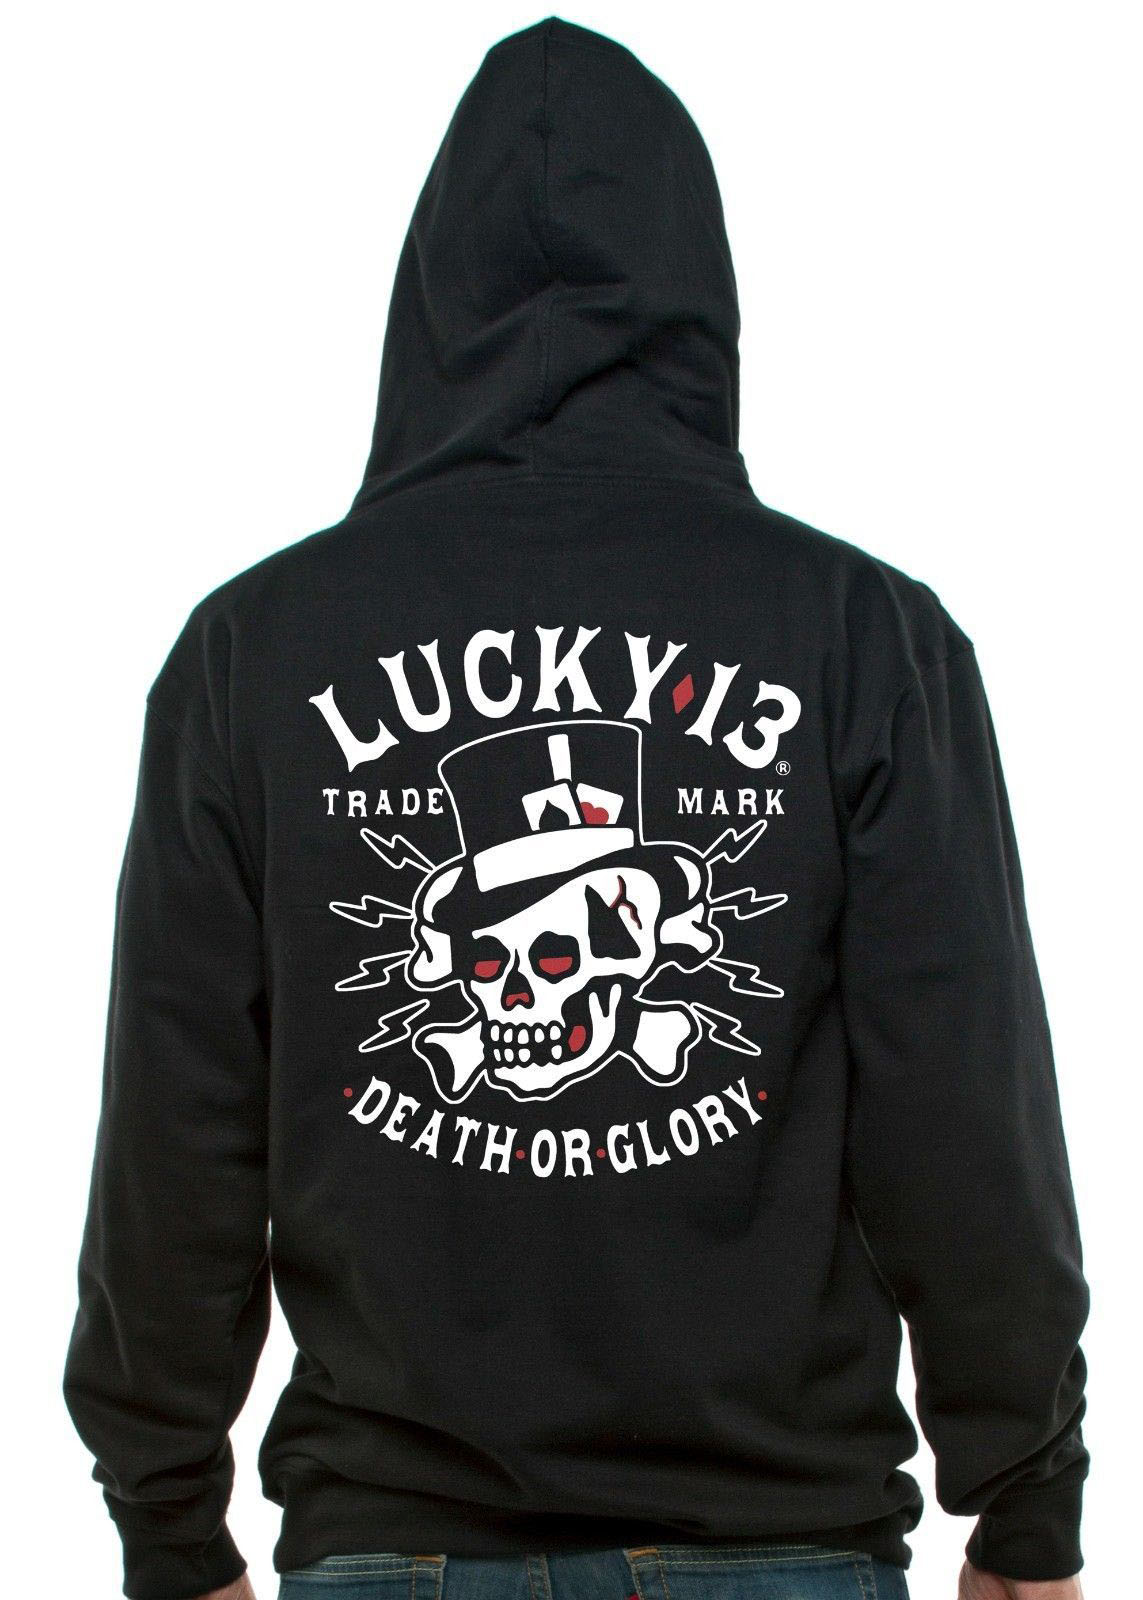 Death Or Glory Men's Zip Hoodie by Lucky 13 Clothing